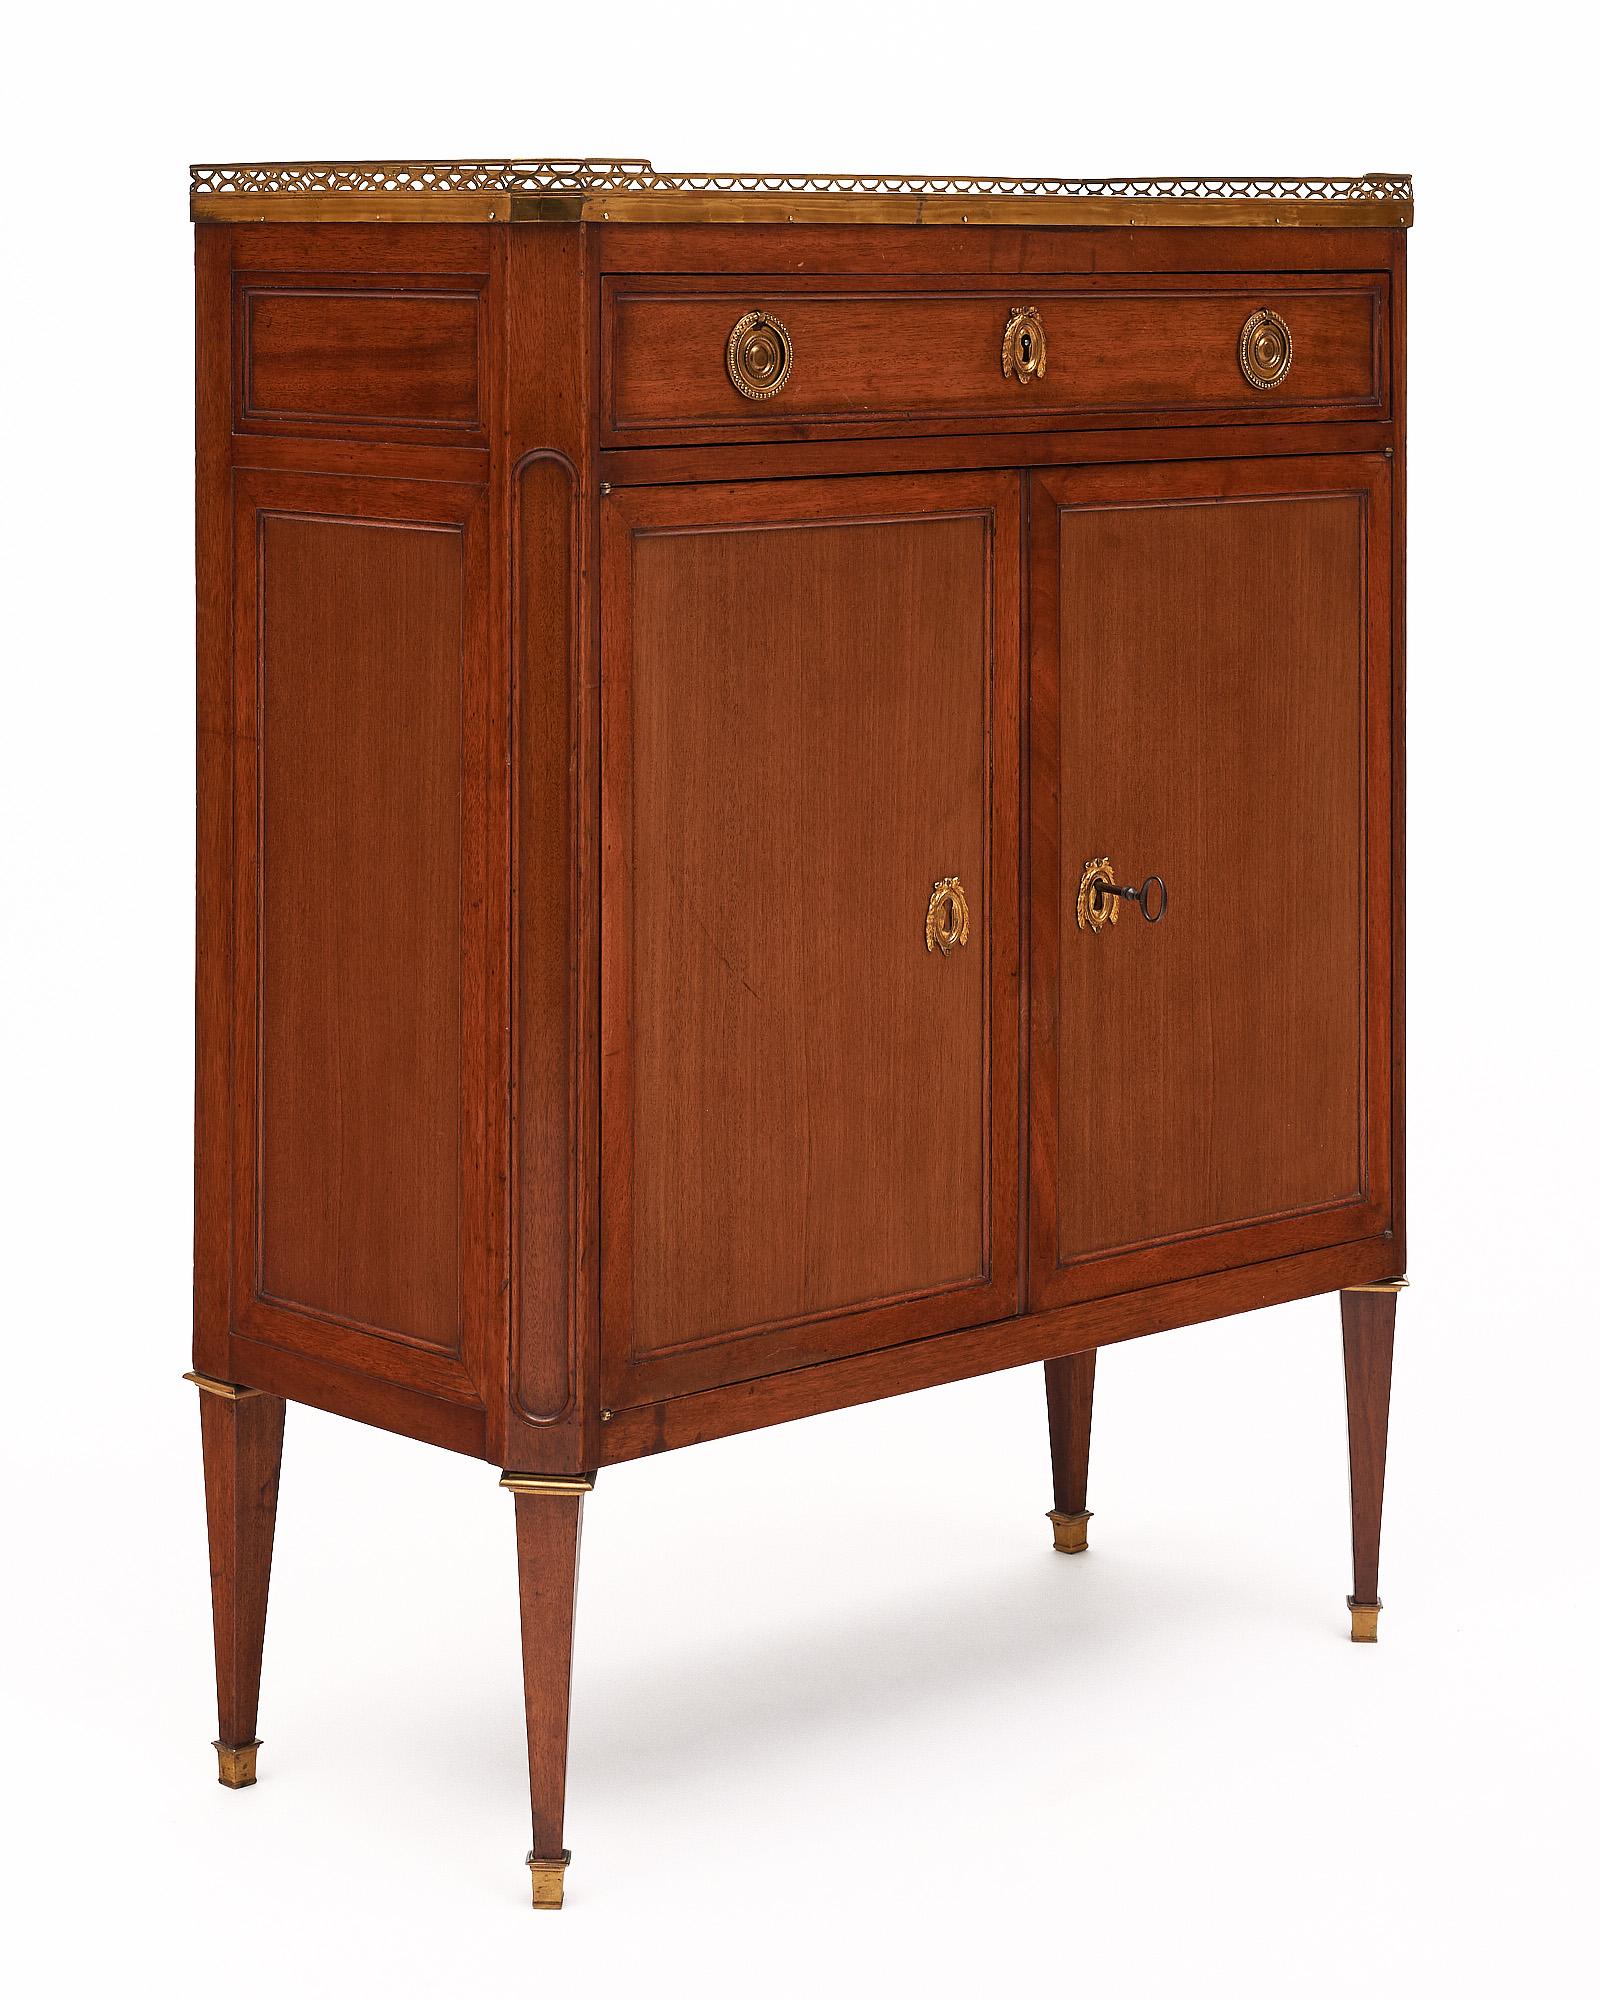 Petite Louis XVI style buffet from France. This piece is made of cherry wood finished in a lustrous French polish. There is a dovetailed drawer above two doors that open to interior shelving. The locks and hardware are all original cast brass. The